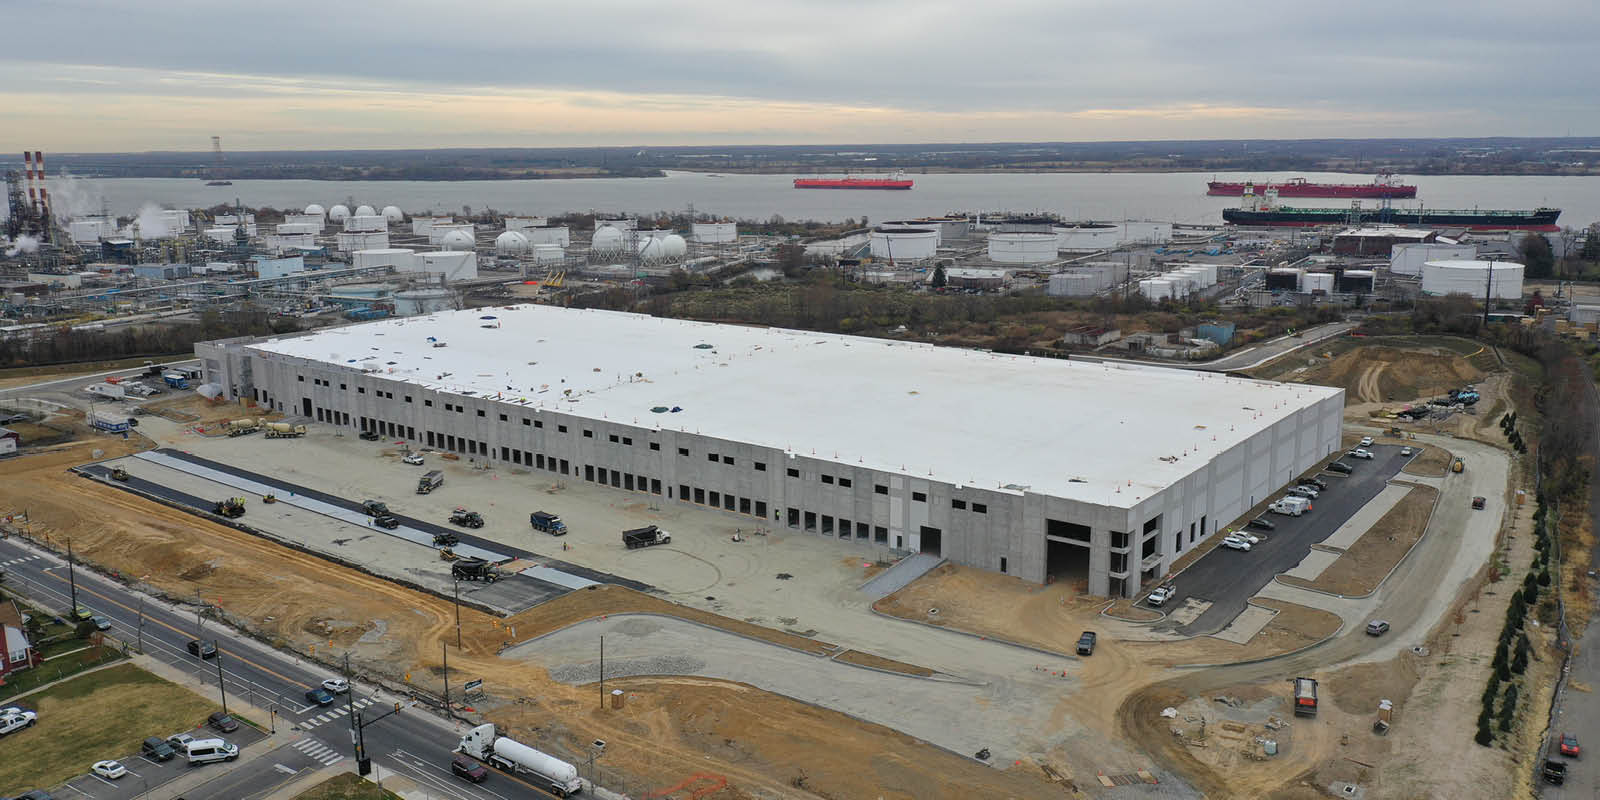 Aerial view of warehouse building with Delaware River in background